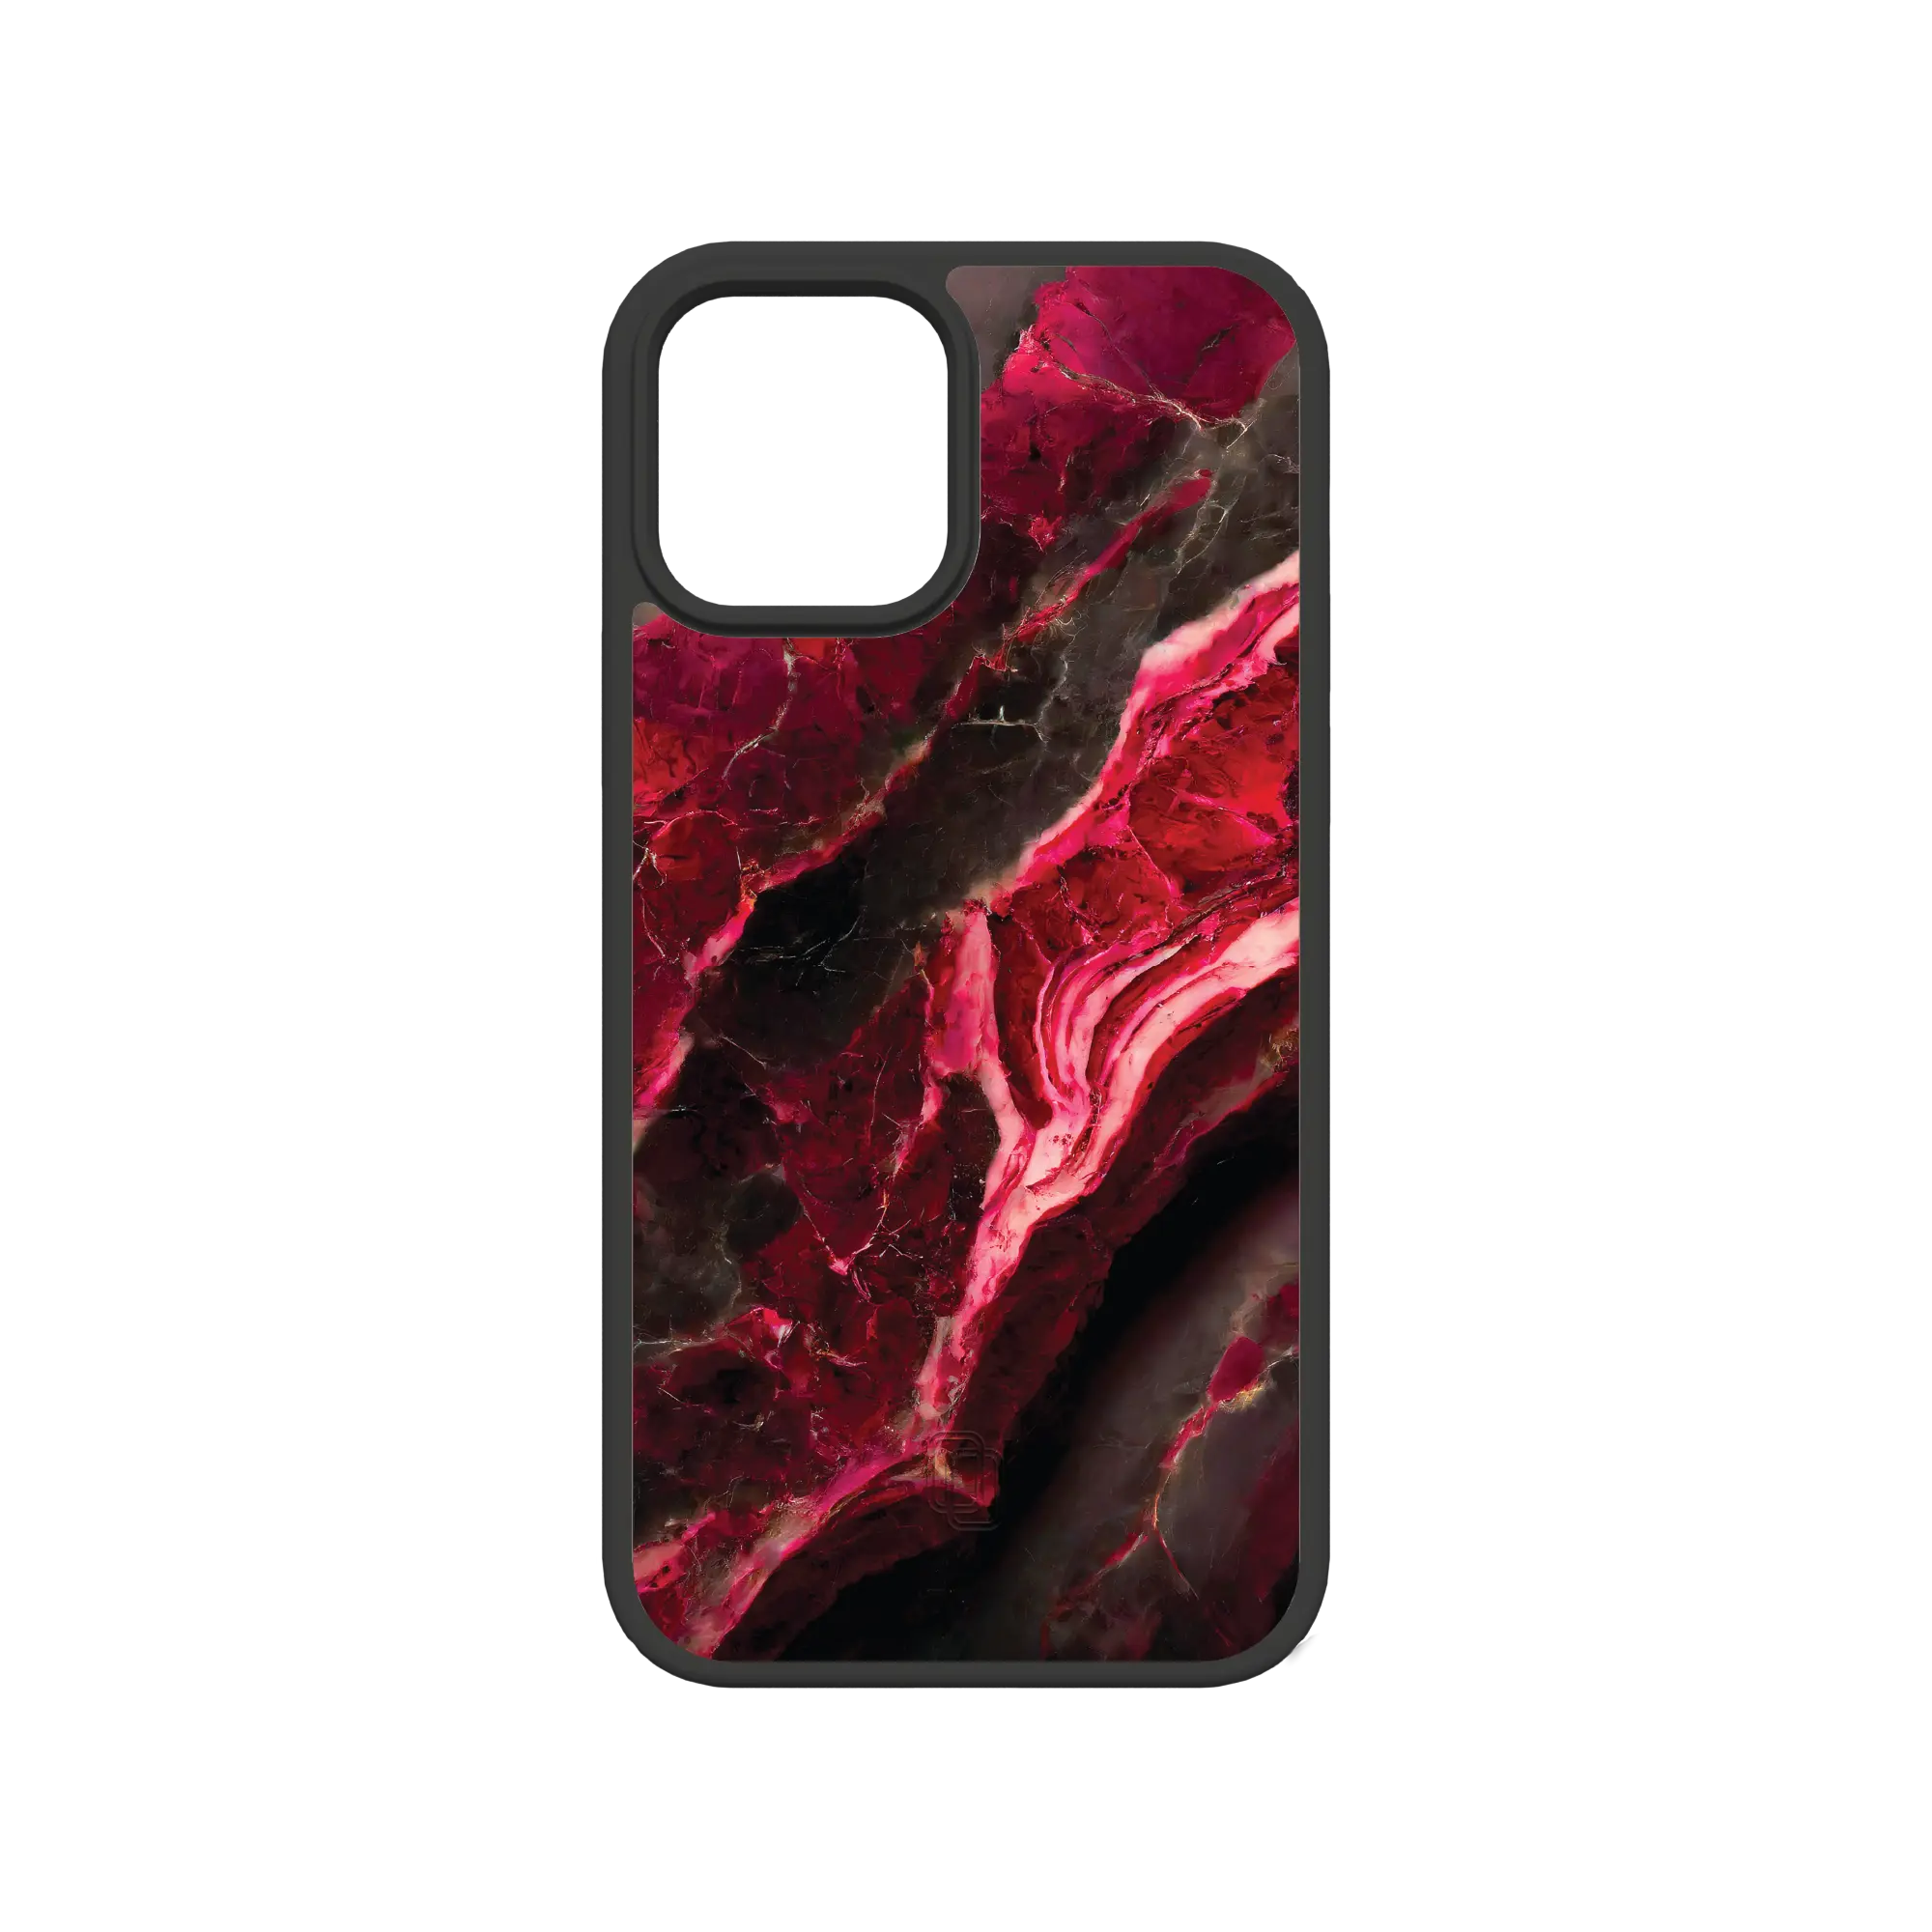 Apple-iPhone-12-12-Pro-Crystal-Clear Morning Sun | Custom MagSafe Red Marble Case for Apple iPhone 12 Series cellhelmet cellhelmet